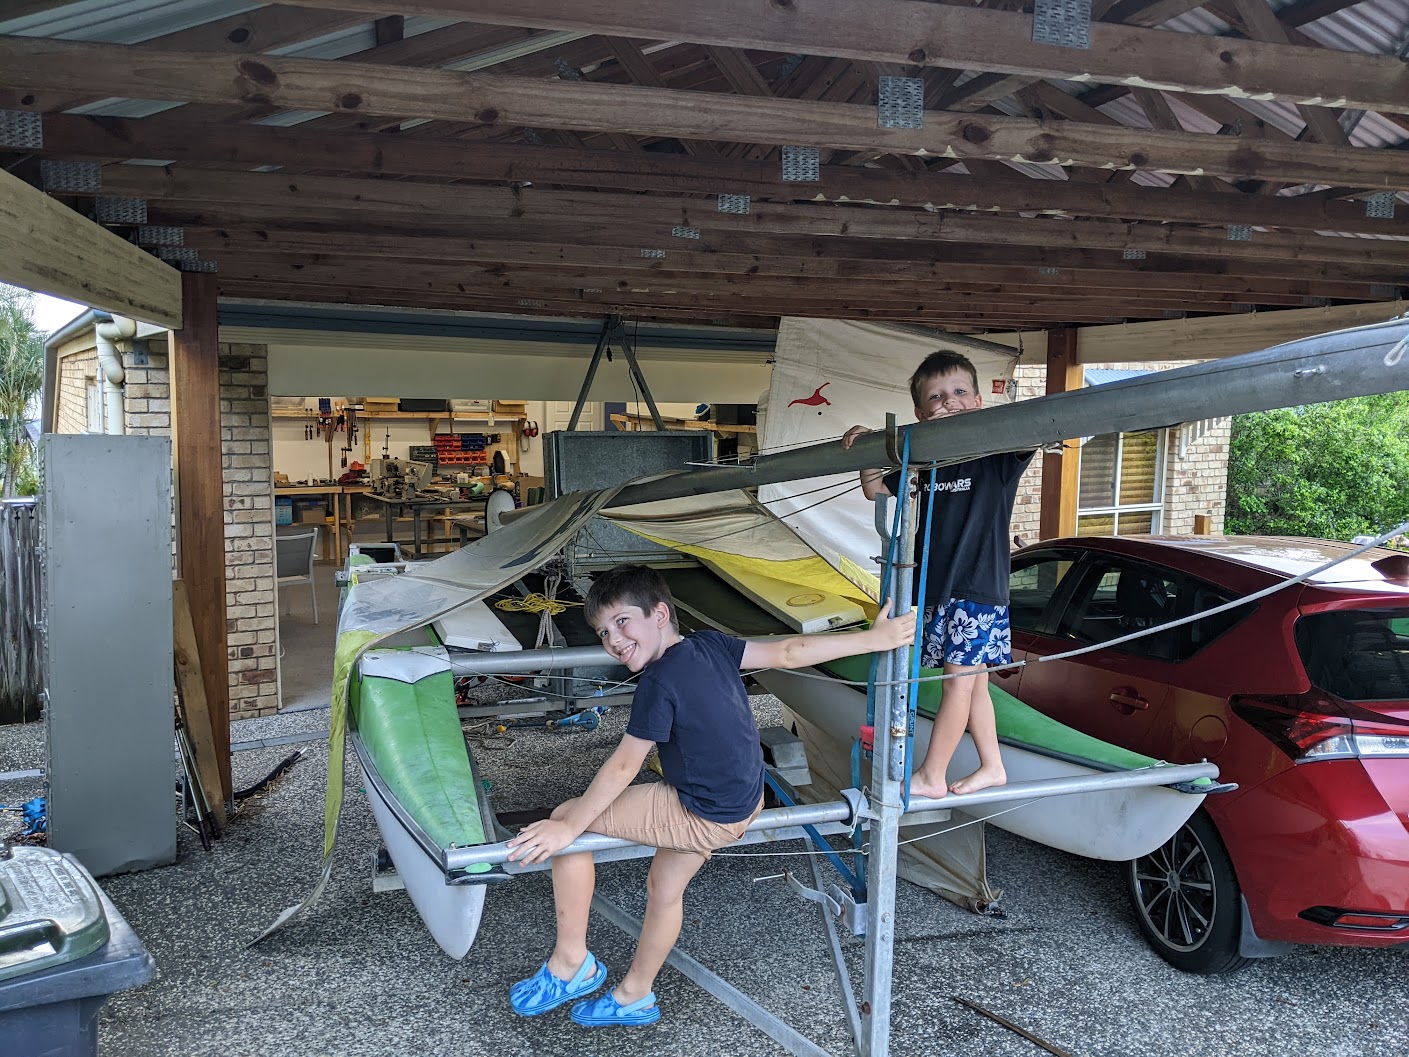 A photo of the boat under our carport with two boys climbing on it.